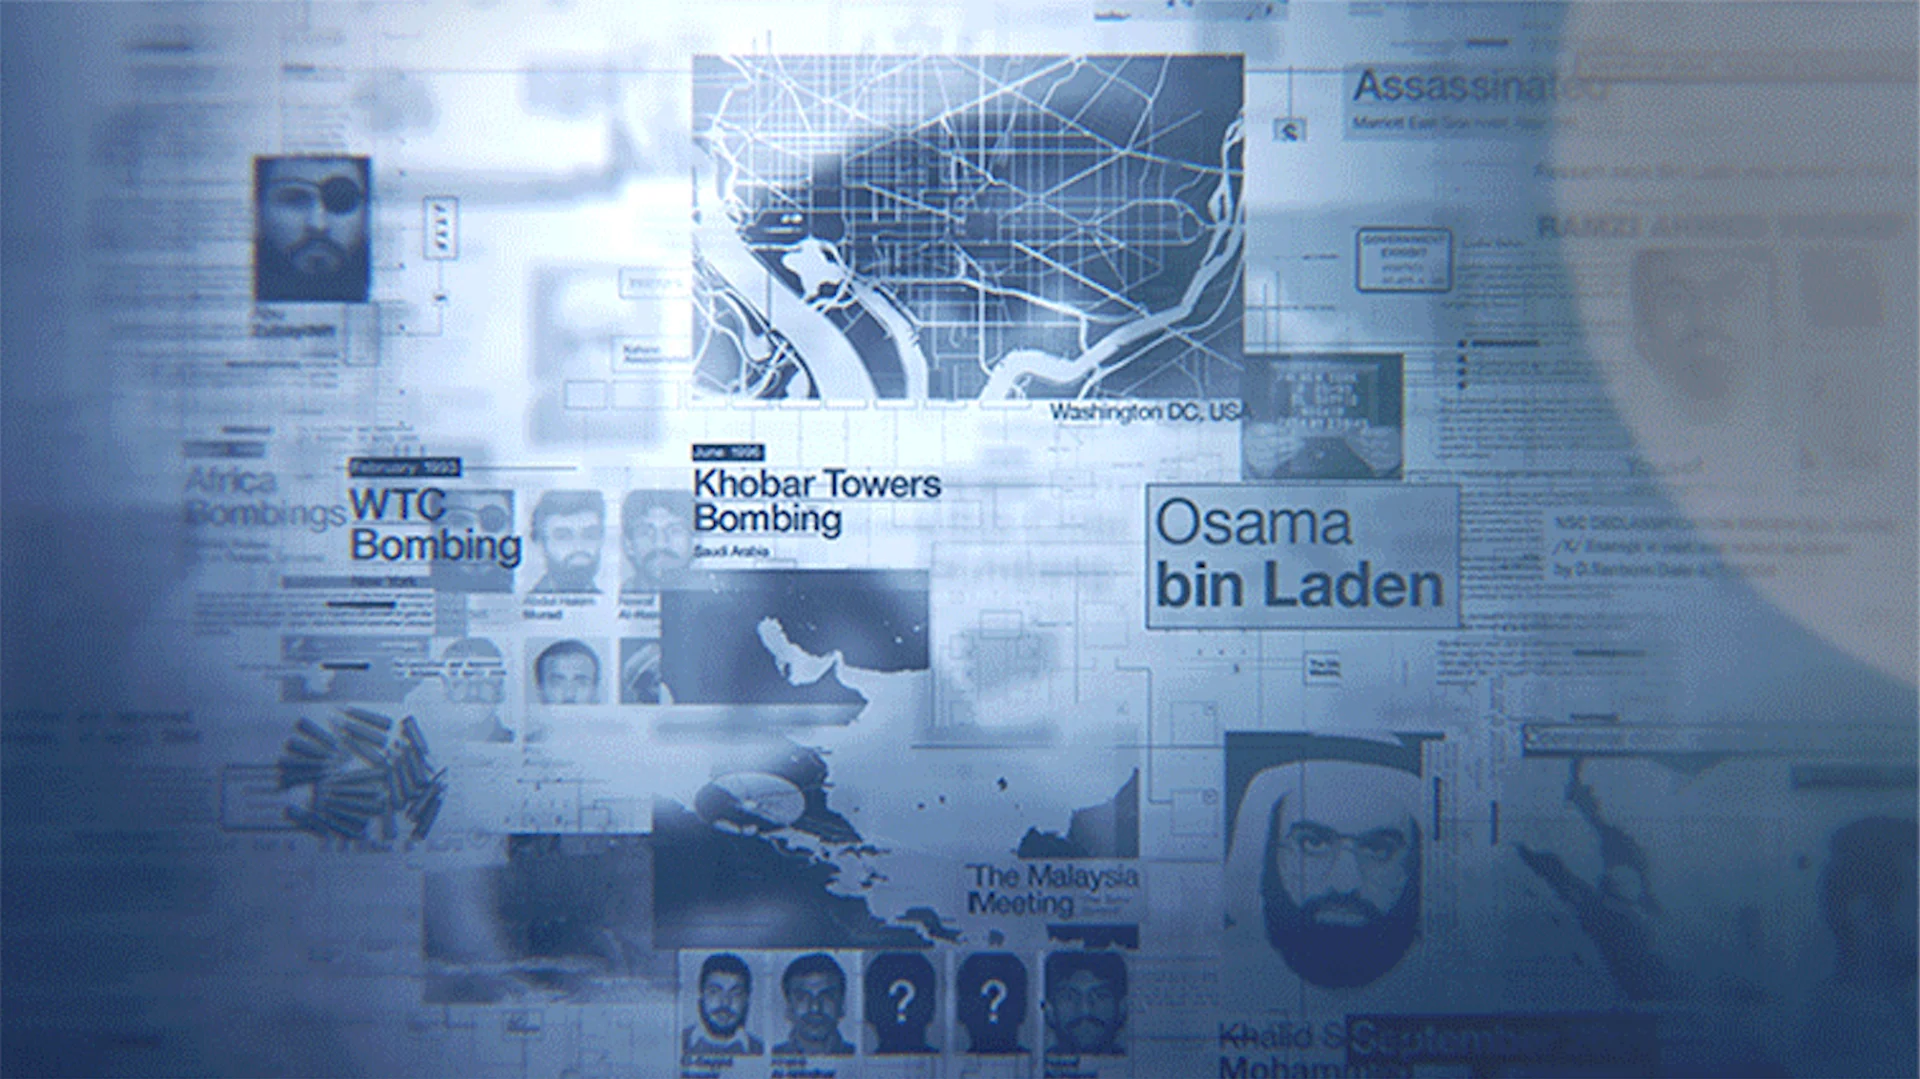 The terror network that conspired to bring down the World Trade Towers on September 11th, 2001 is vast, complex, and tangled. That’s why our partners over at History & Left/Right came to us to help organize this web of connections in a series graphic package for the documentary Road to 9/11.